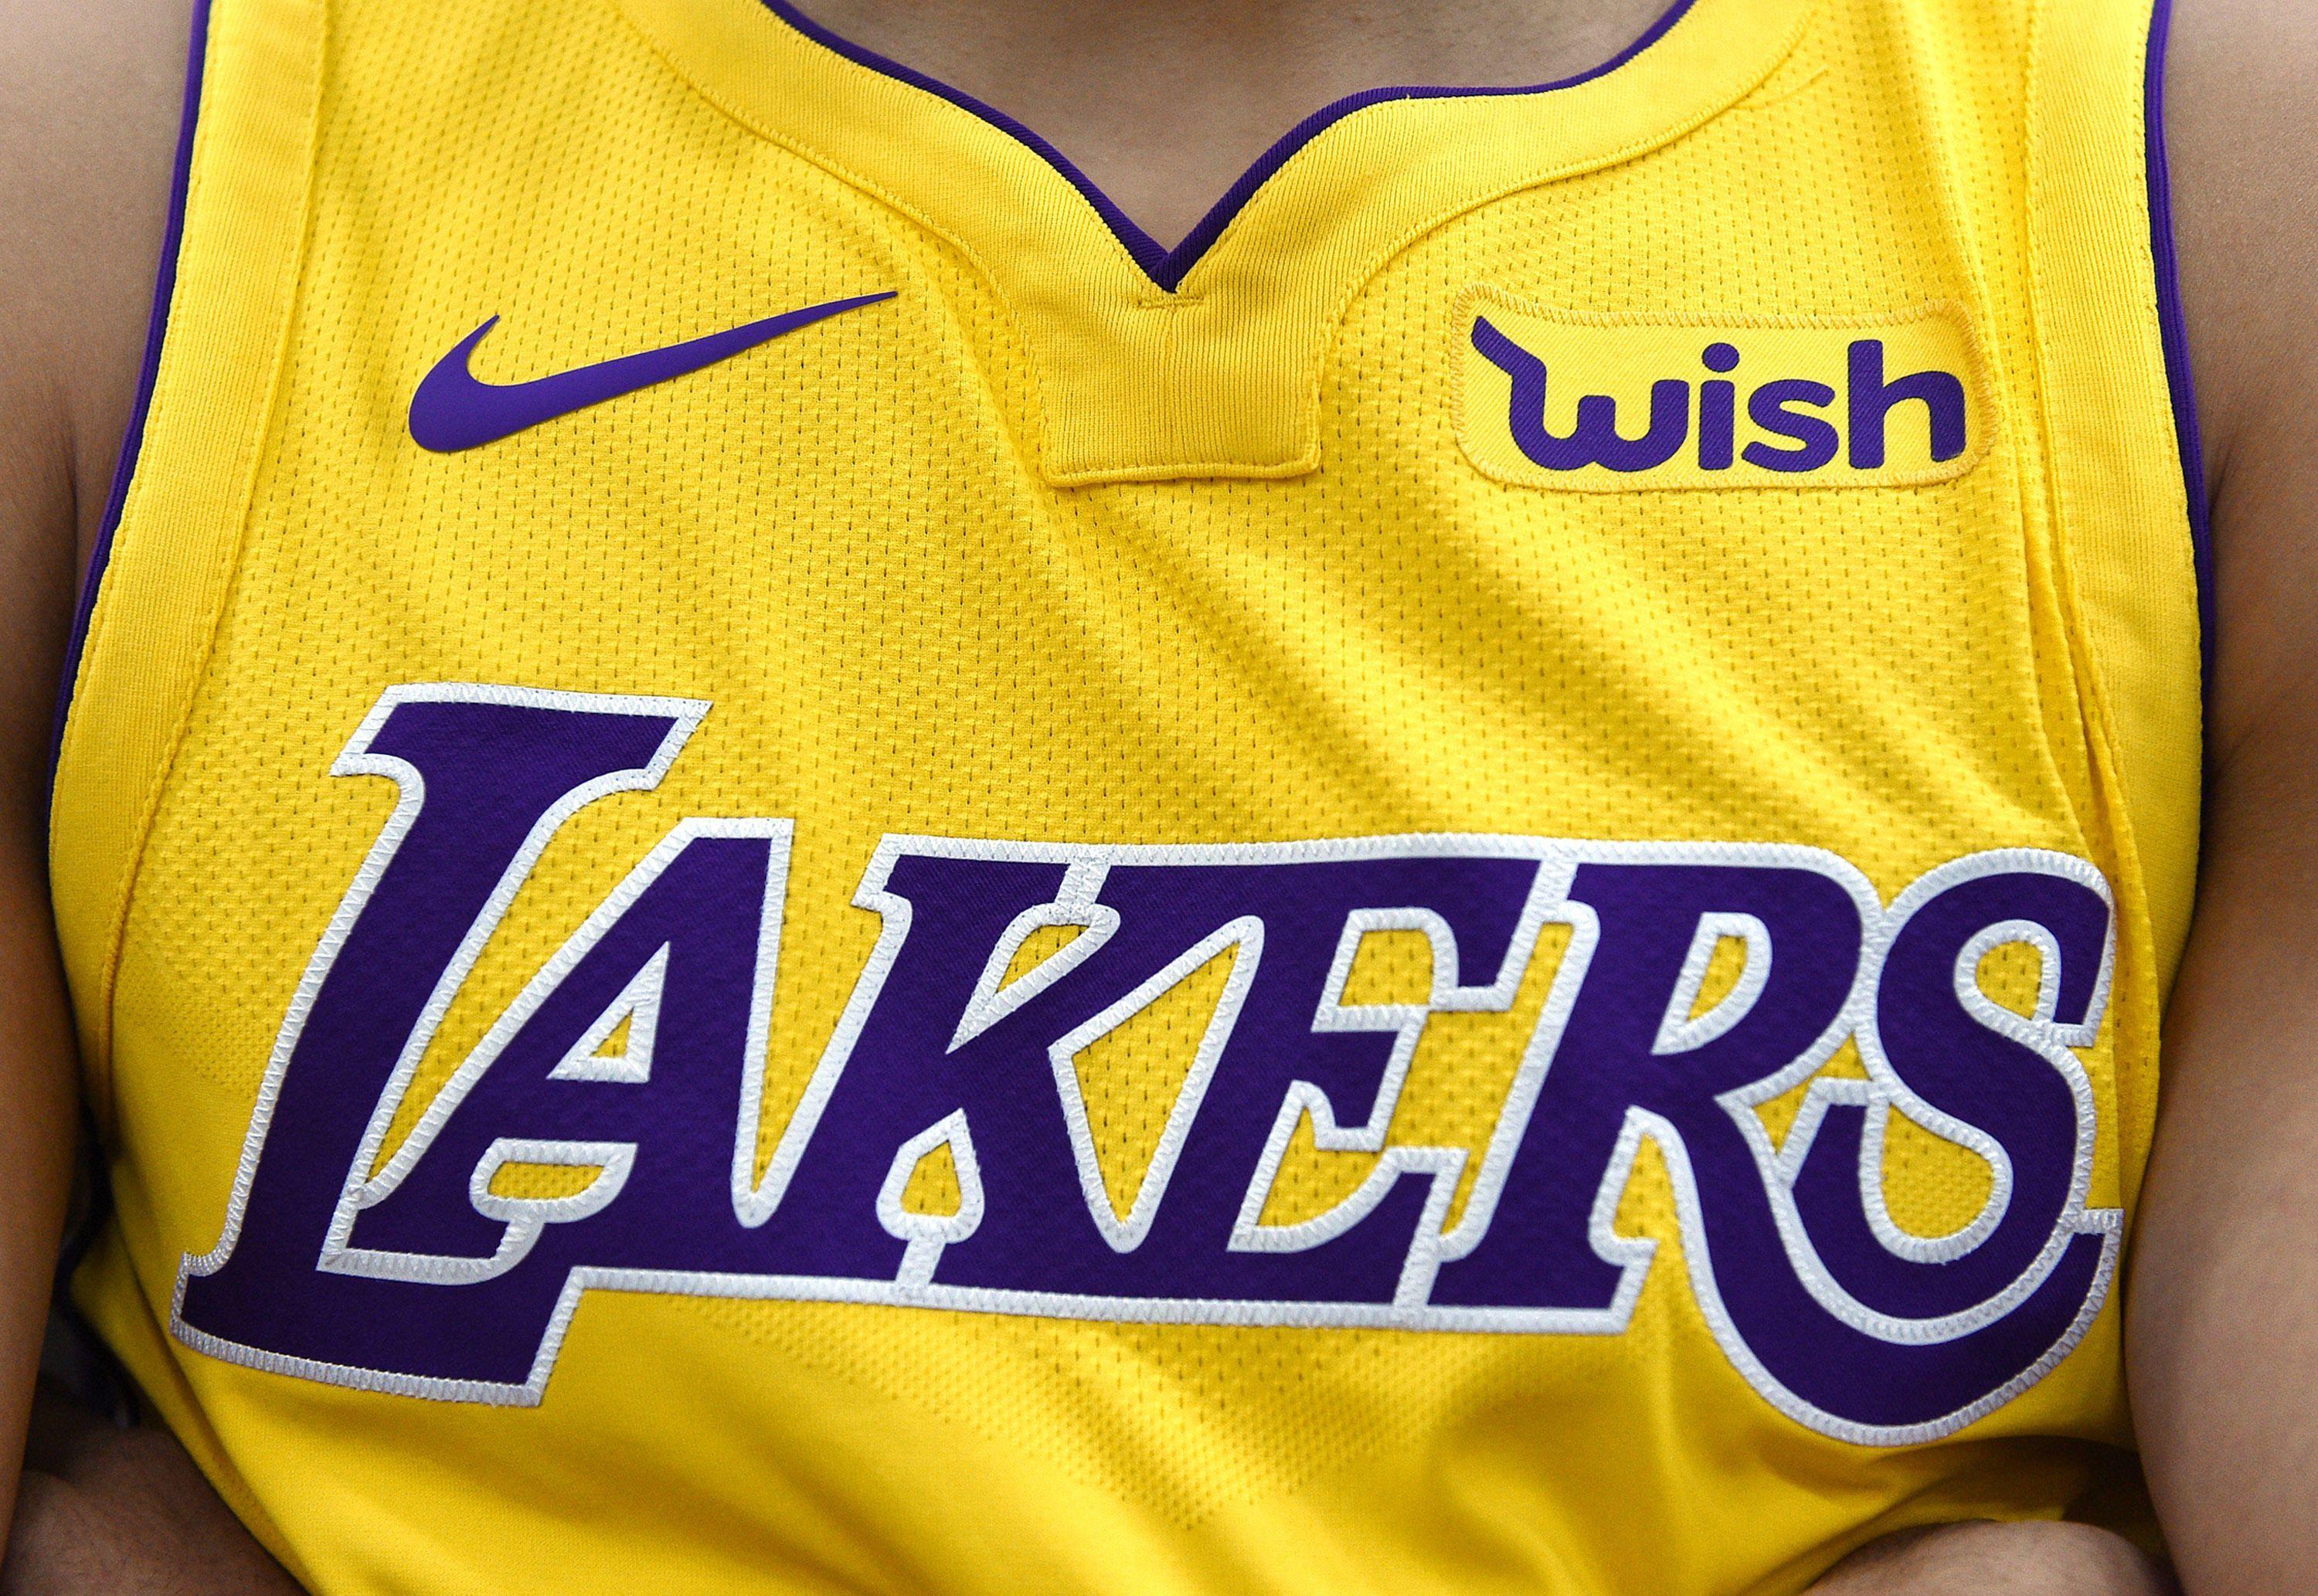 Wish On Lakers Jersey Logo - Shopping app Wish building an empire on $2 sunglasses to rival ...